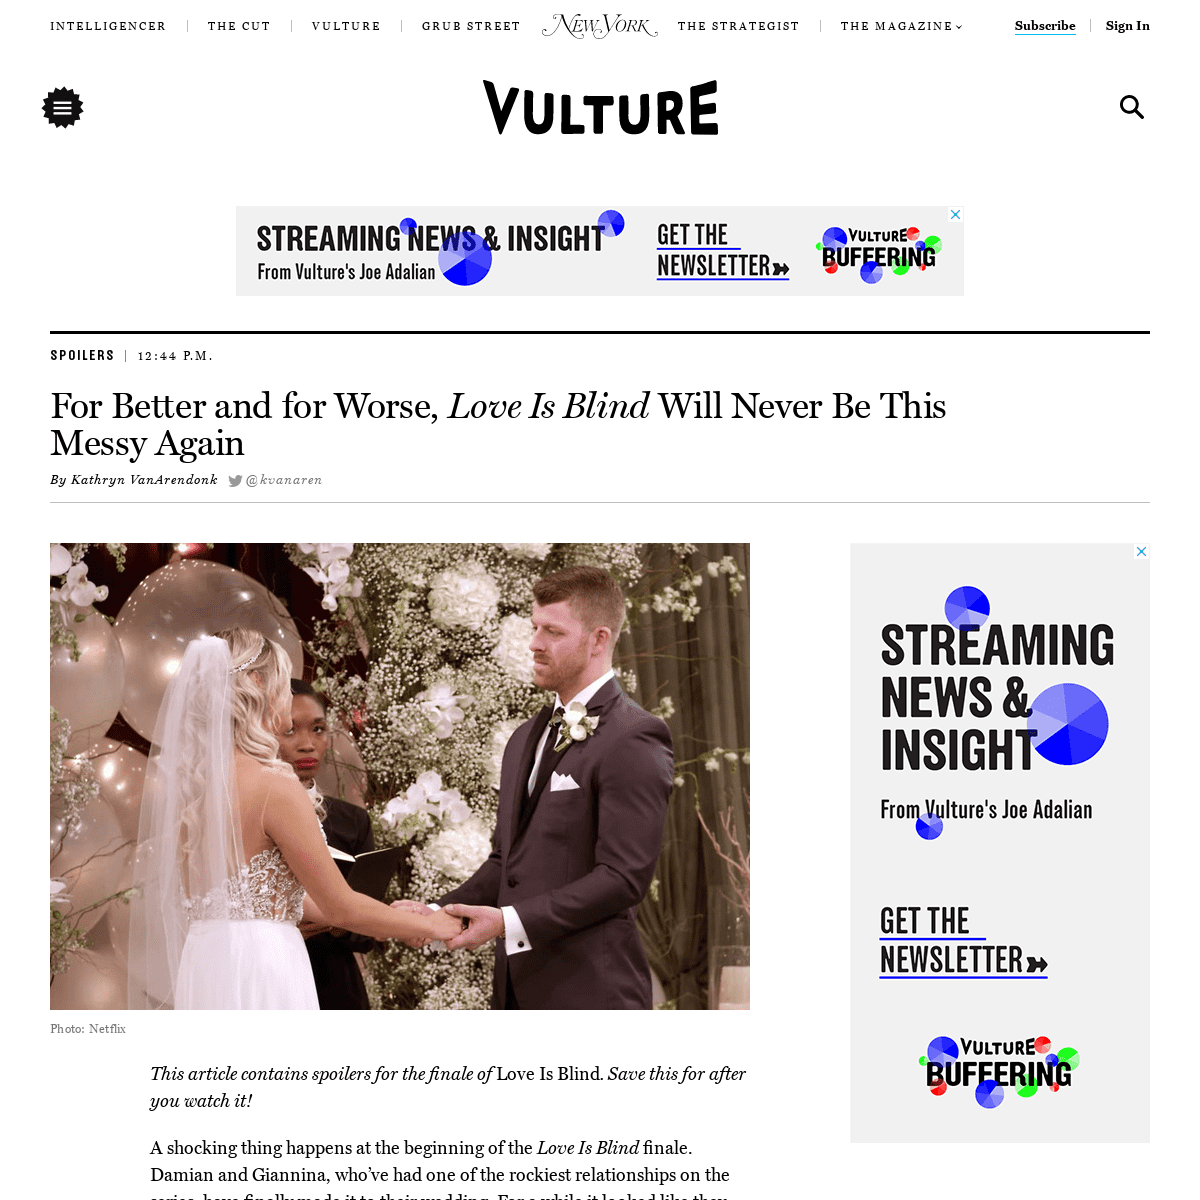 A complete backup of www.vulture.com/2020/02/love-is-blind-finale-netflix-reality-tv.html